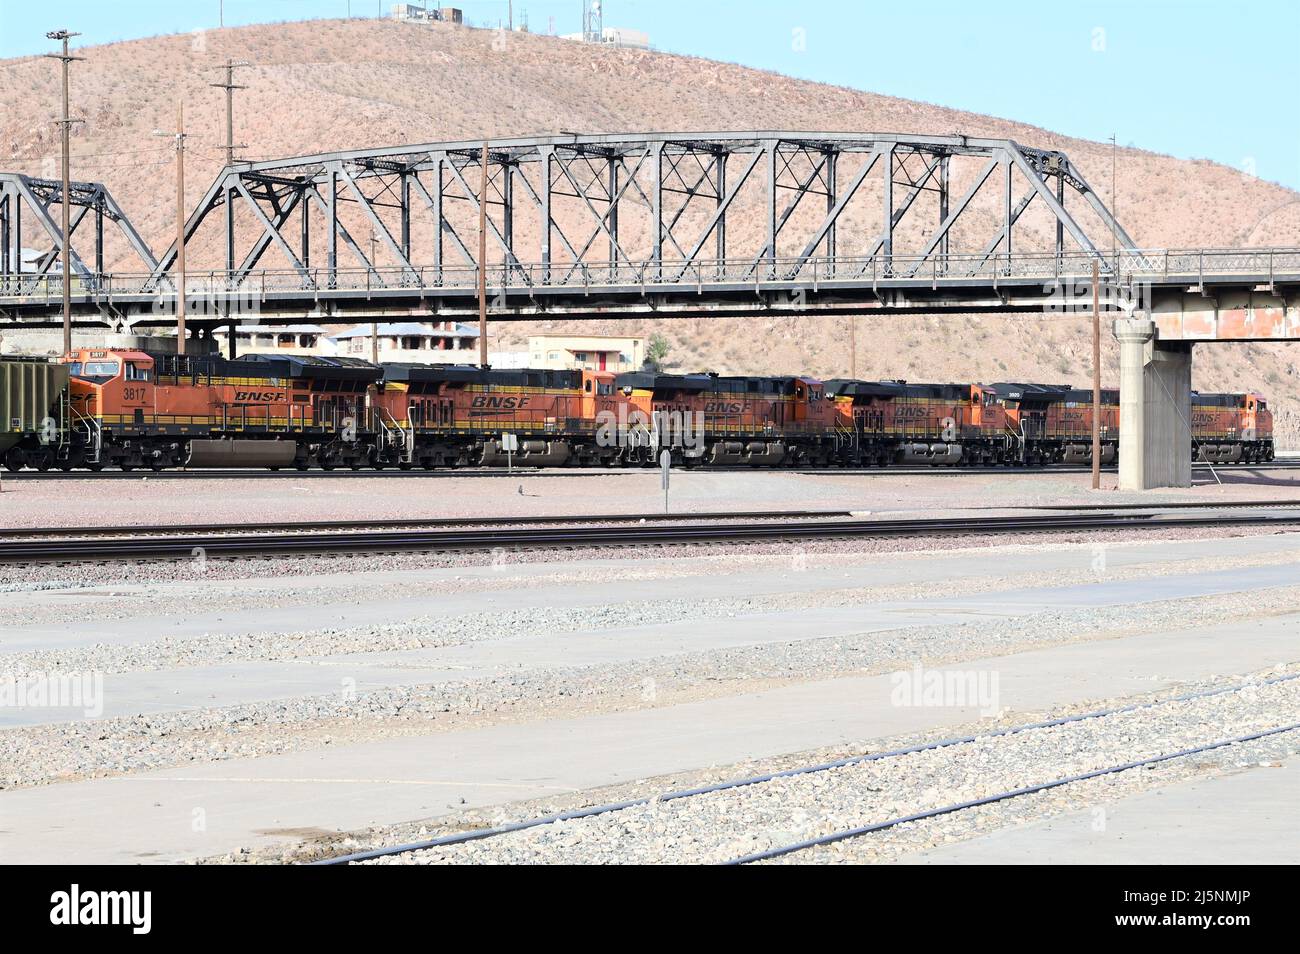 BNSF 7780 BNSF Railway GE ES44DC locomotive passing through Barstow station with a freight train. Stock Photo